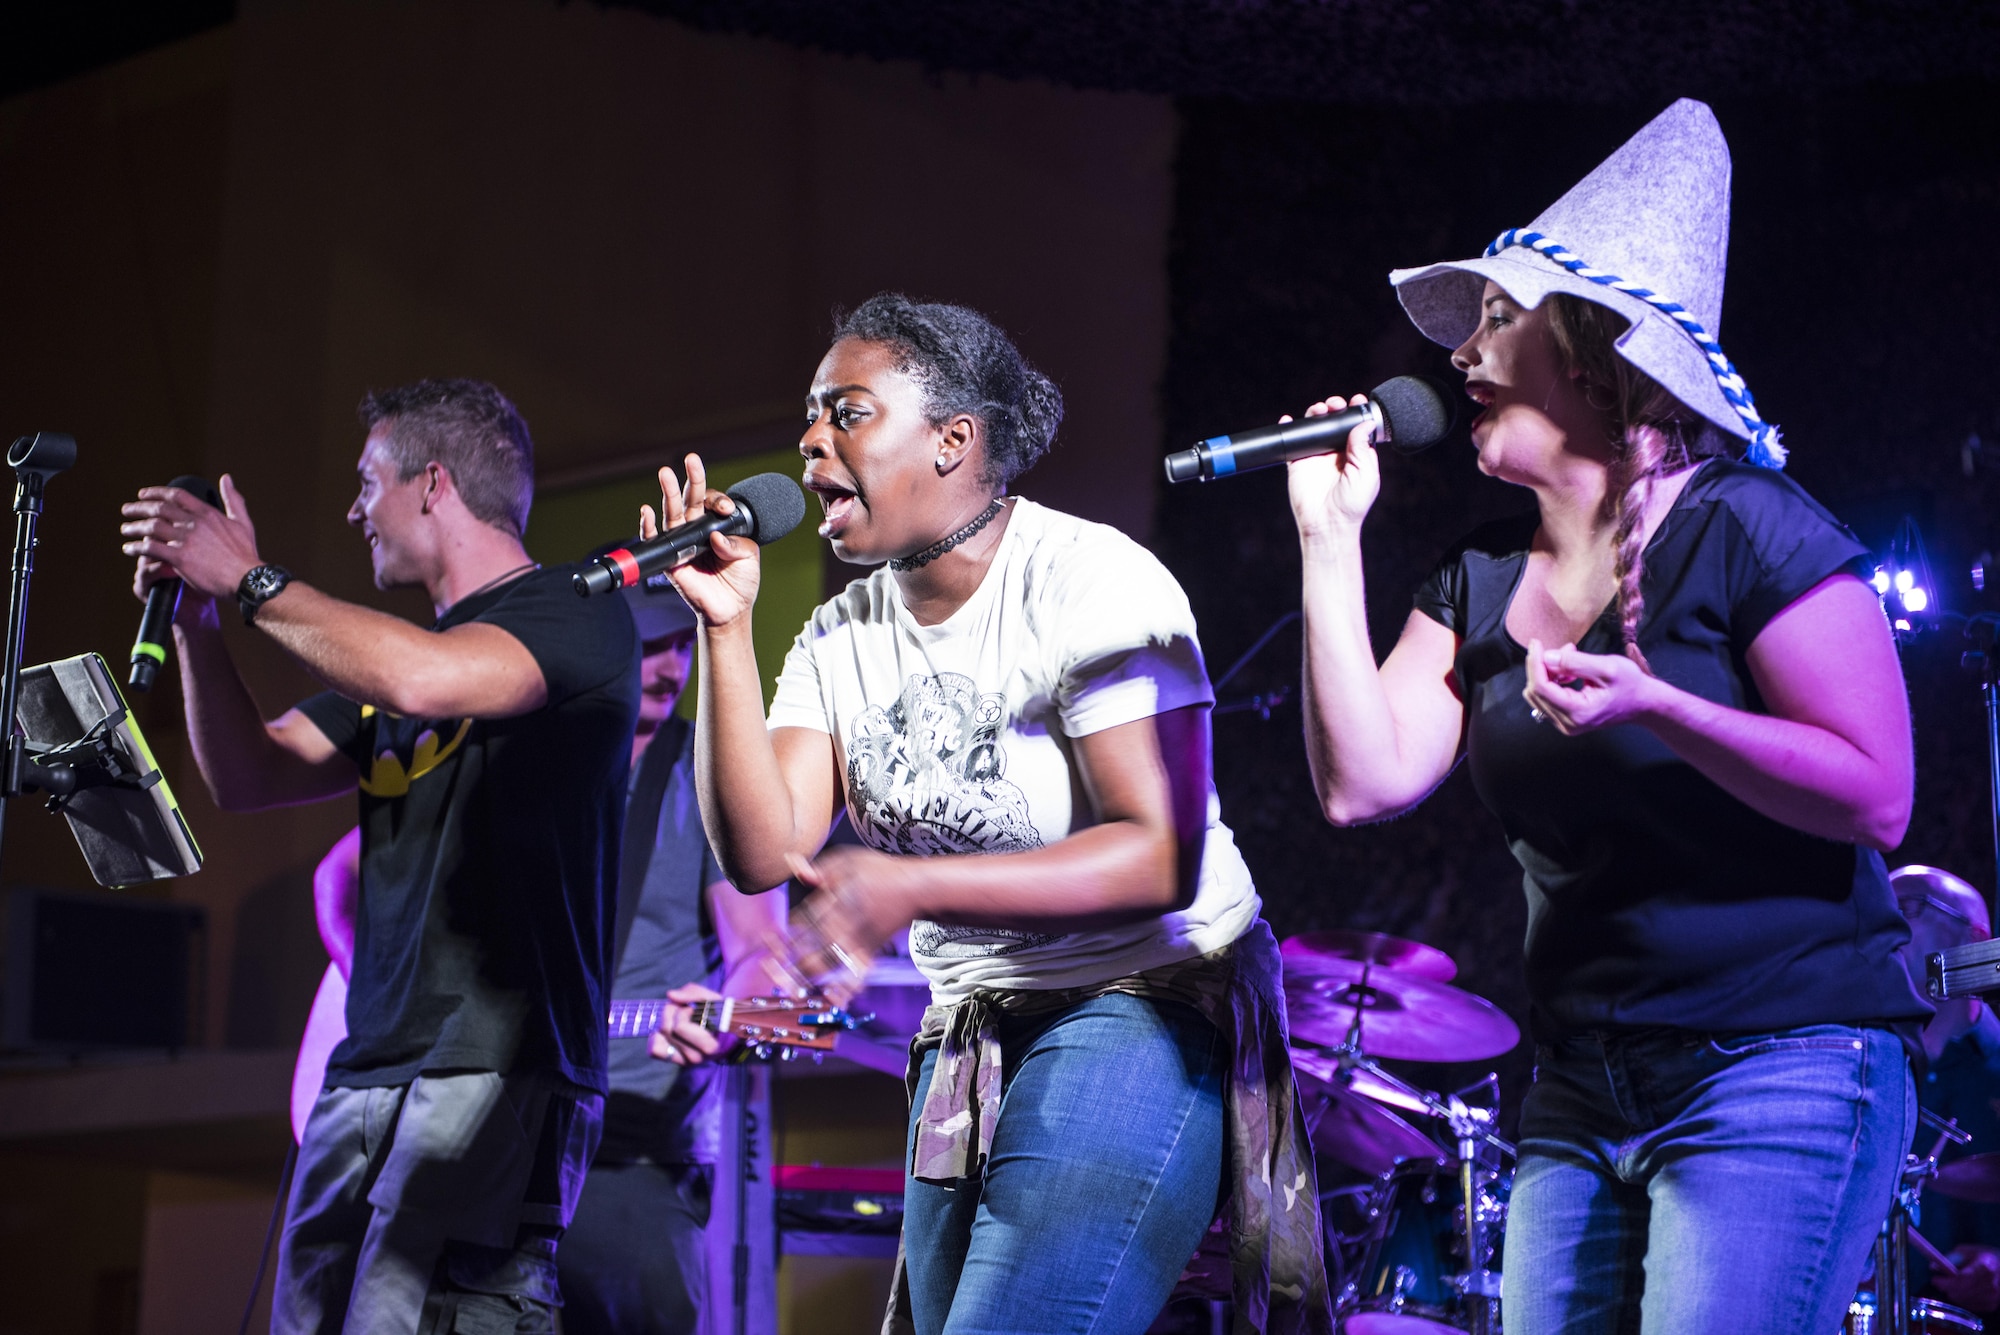 Vocalists from the U.S. Air Force Central Command band join other Coalition service member musicians on stage for a rendition of, “Sweet Home Alabama,” during an Oktoberfest celebration Sept. 24, 2017, in Southwest Asia. The USAFCENT band, Touch N’ Go, travels to a number of installations in support of Operation Inherent Resolve. (U.S. Air Force photo by Senior Airman Joshua Kleinholz)